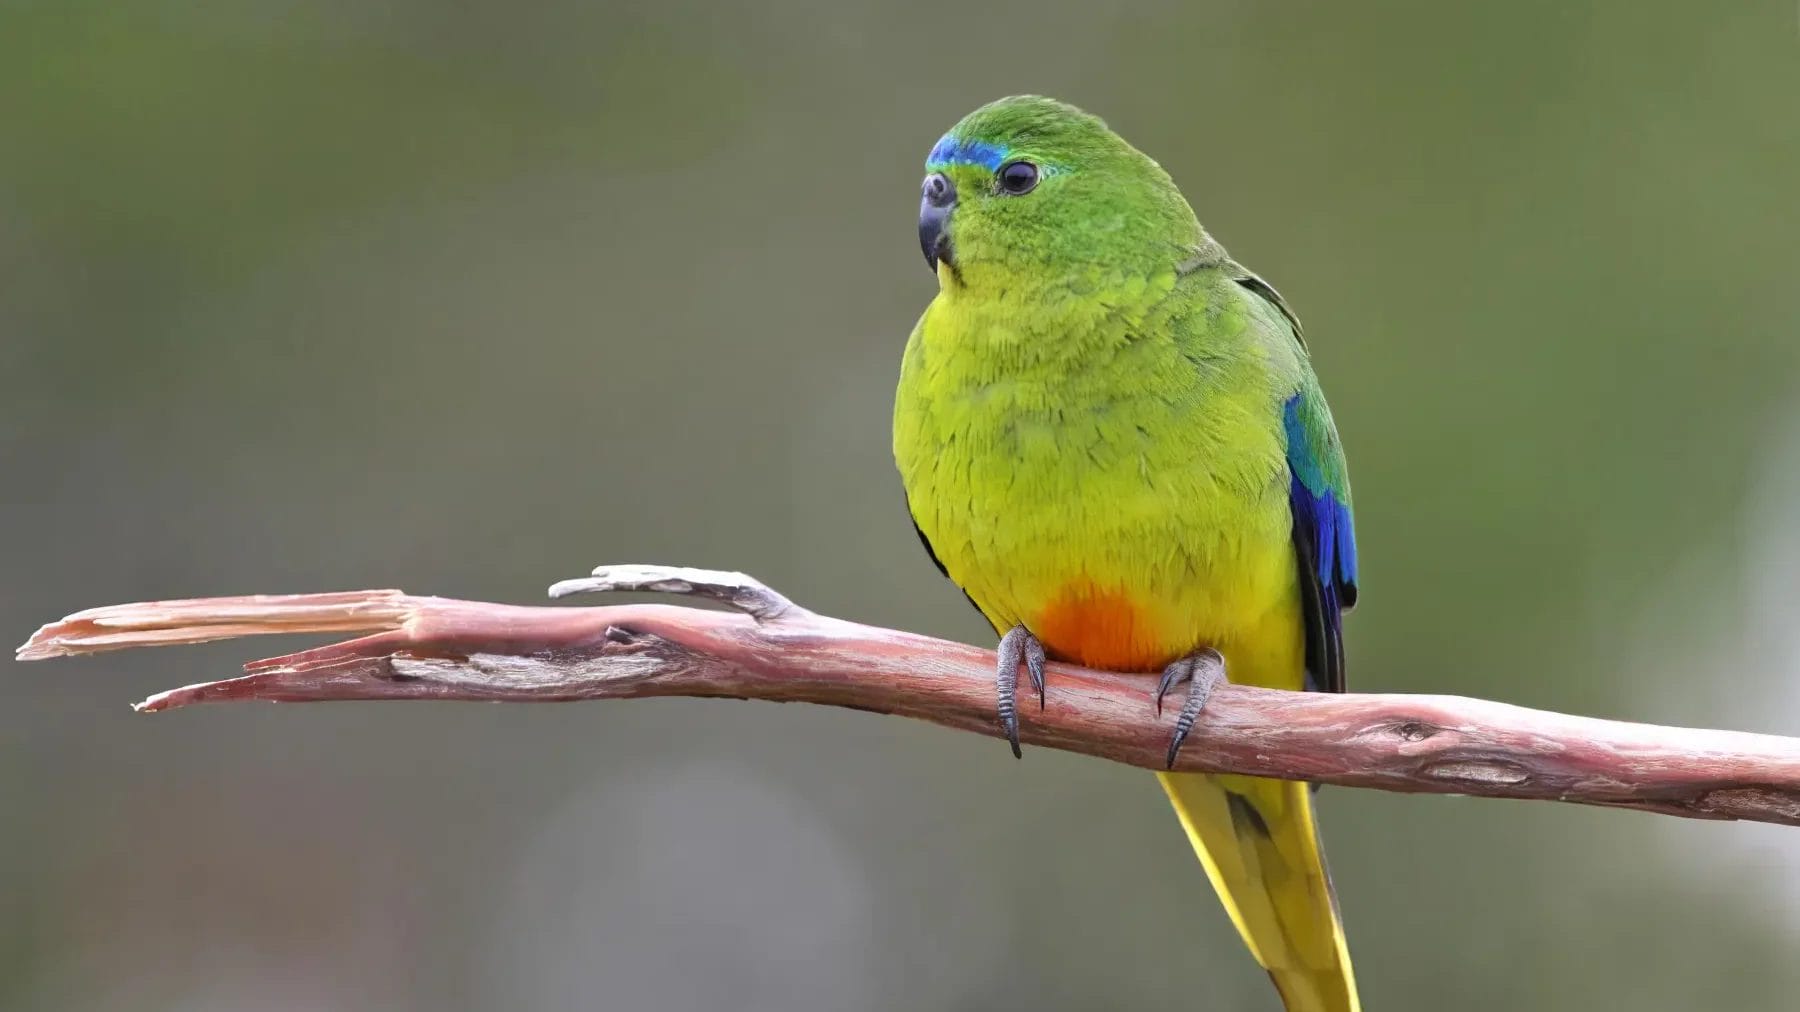 Orange-bellied Parrot, Credit Inala Tours